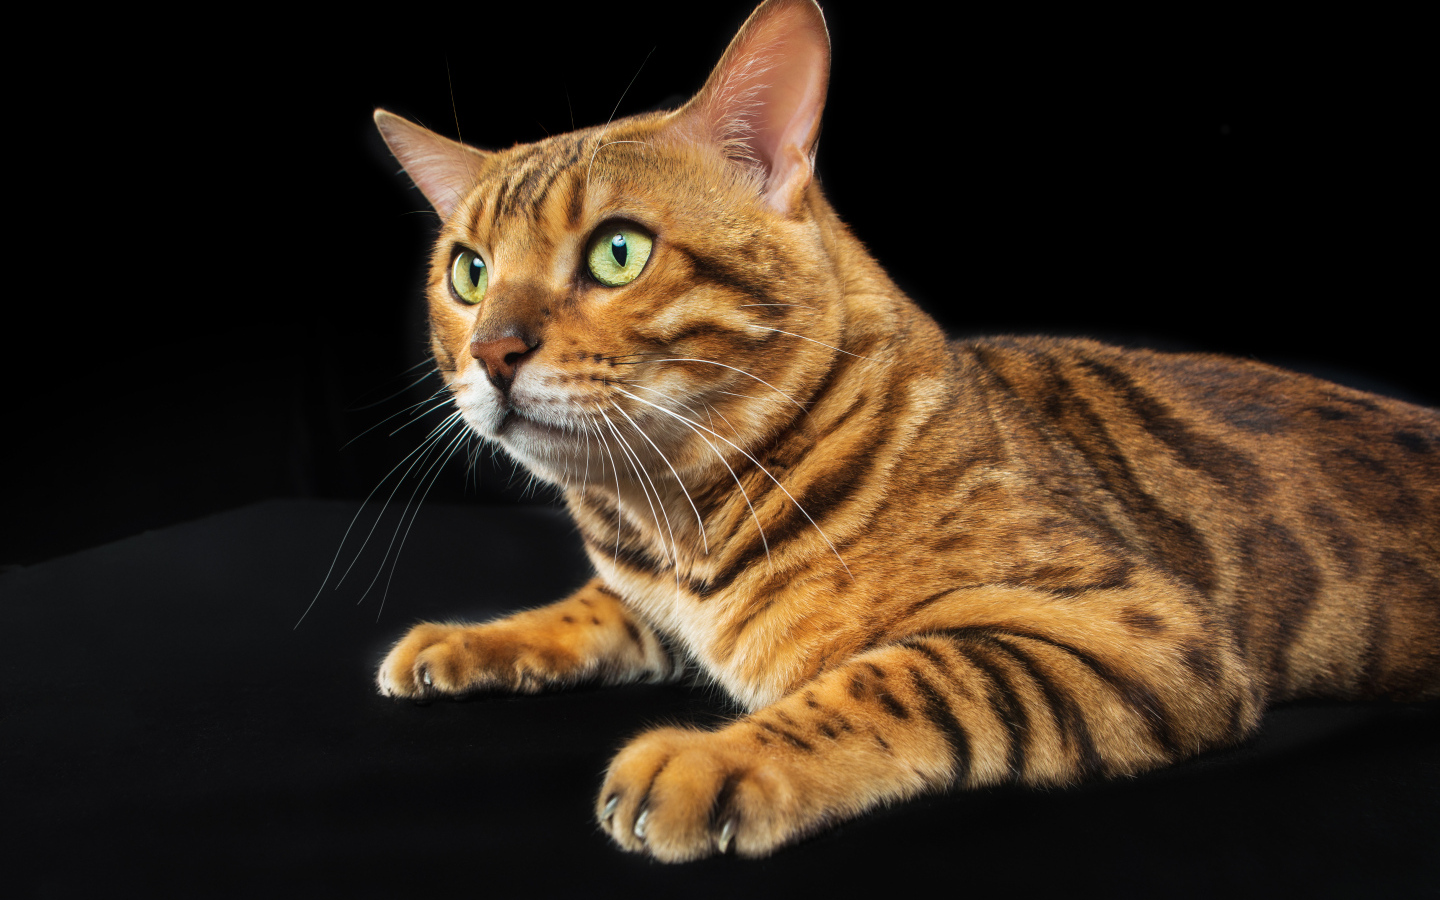 Bengal cat with green eyes on a black background